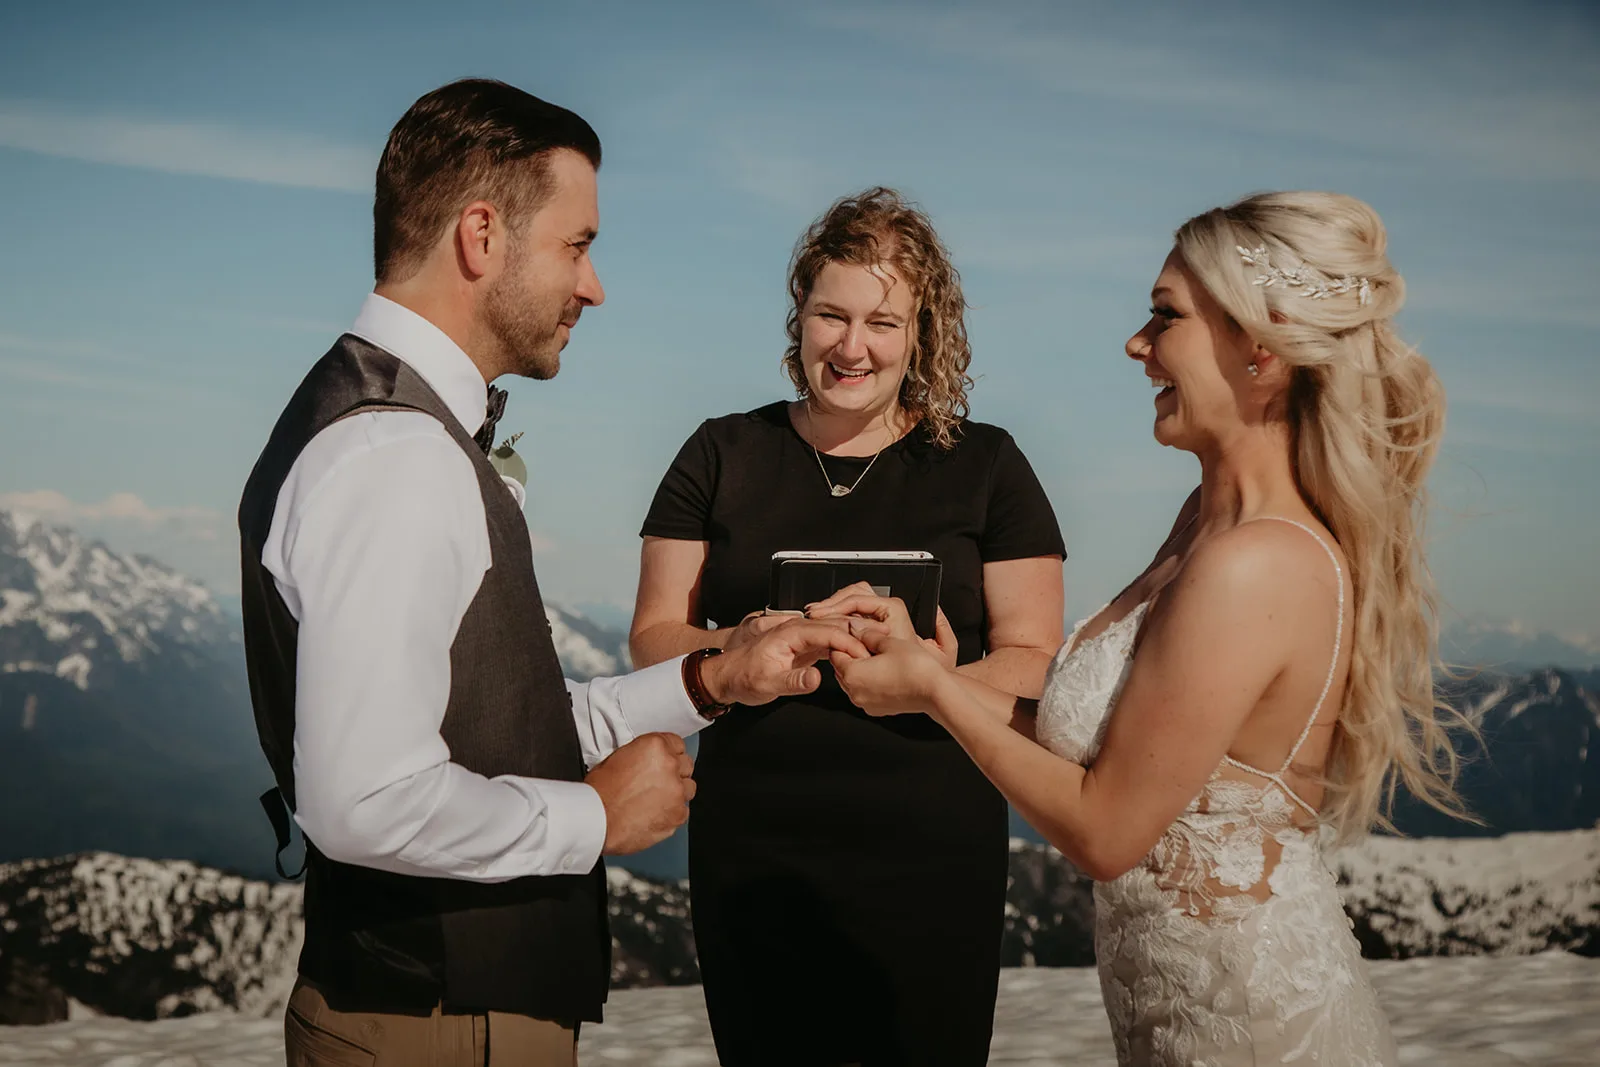 Young Hip & Married wedding officiant Shalom marrying a couple during a helicopter elopement